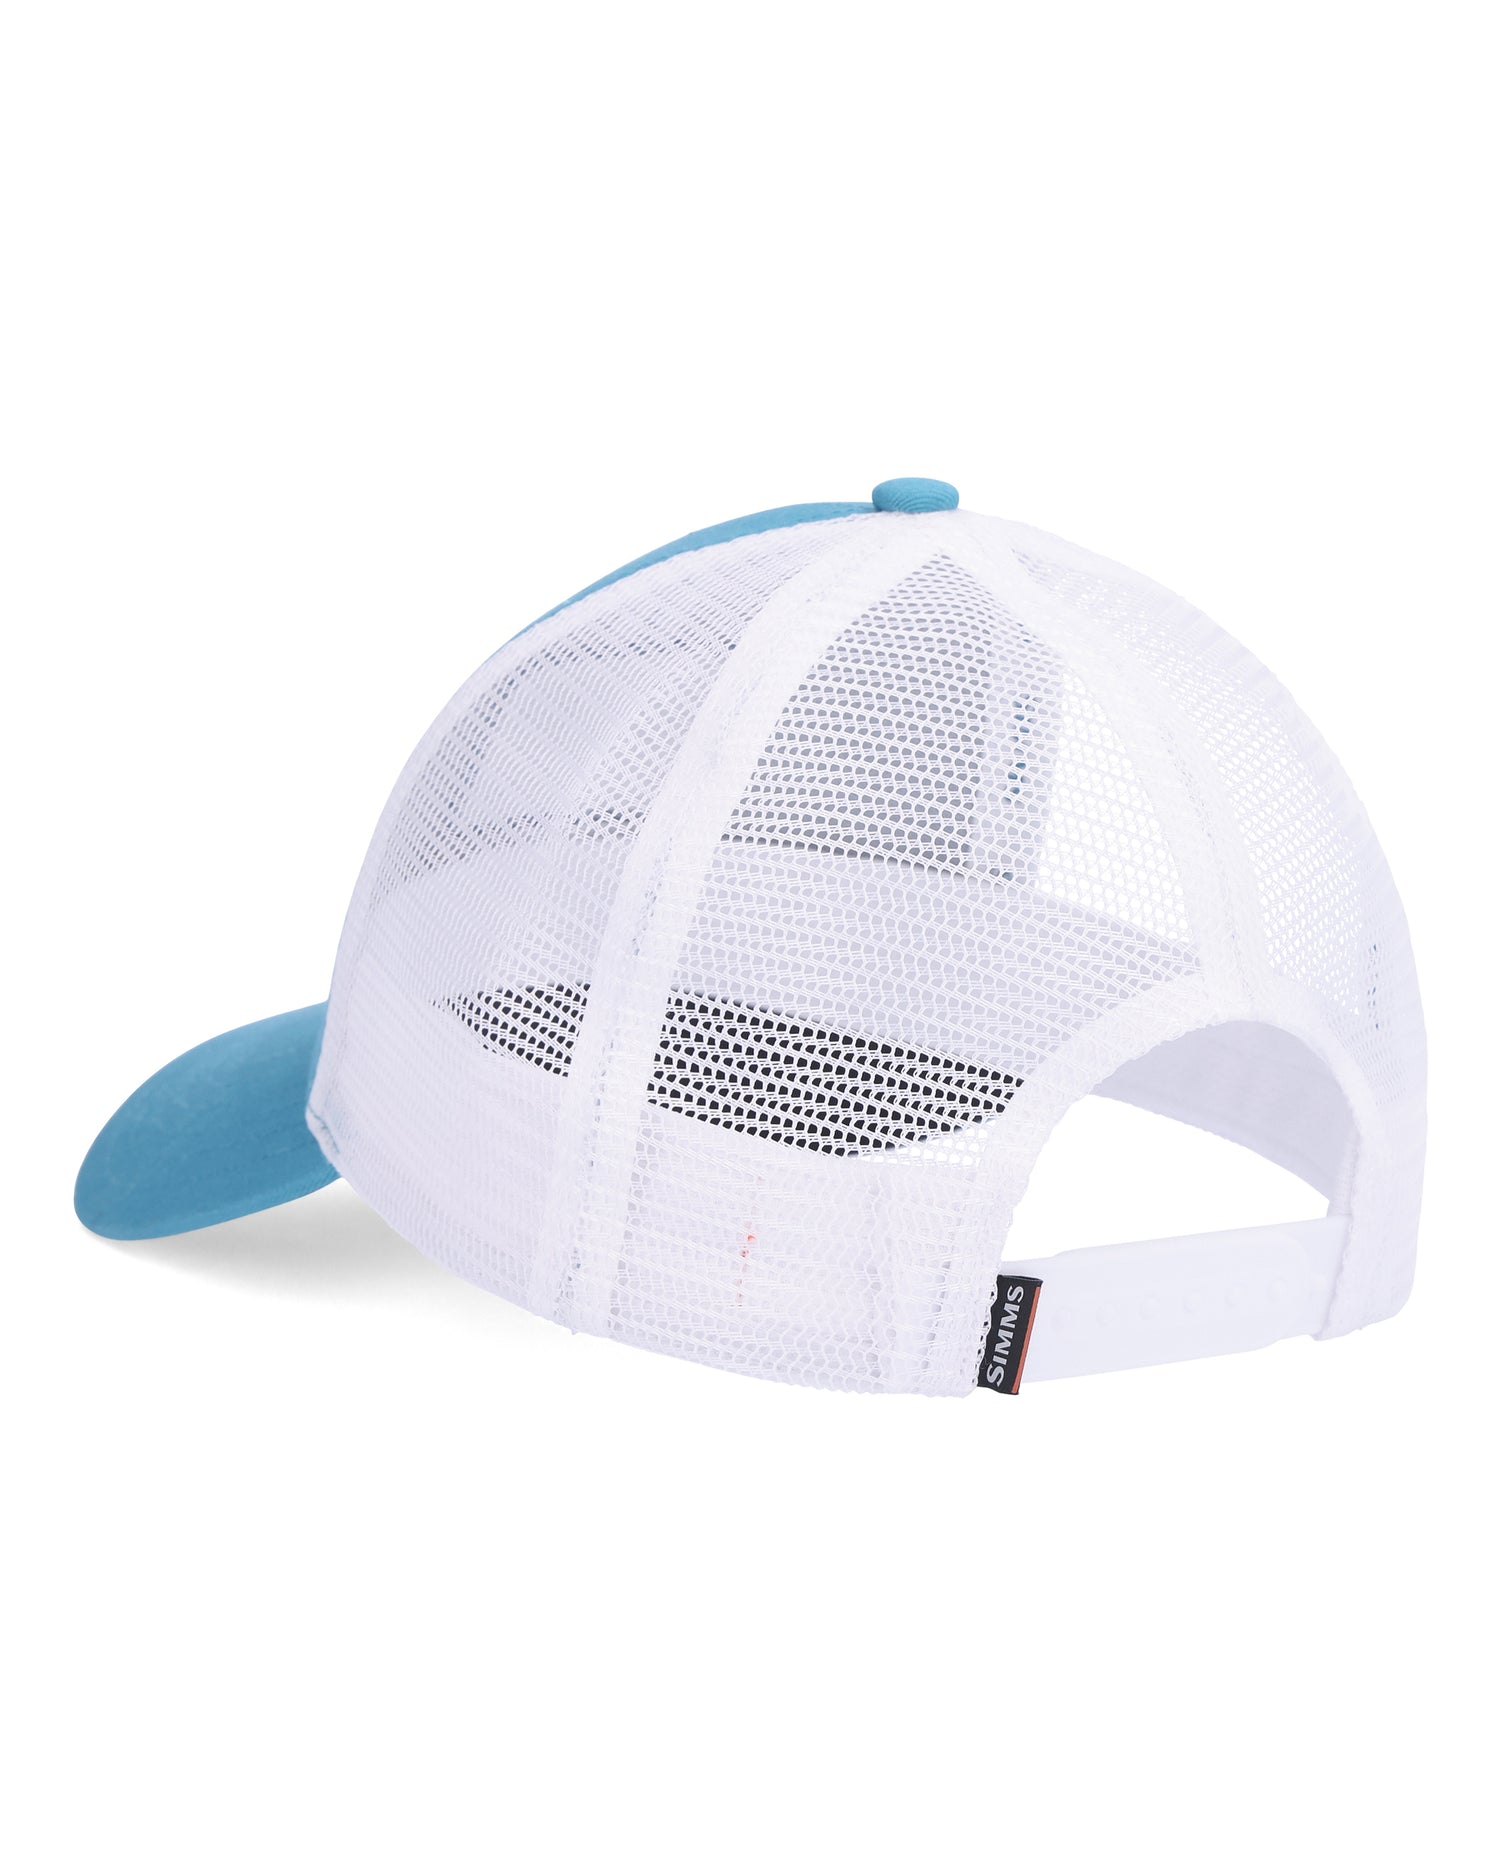 12226-459-trout-icon-trucker-tabletop-s23-3_gulf-blue